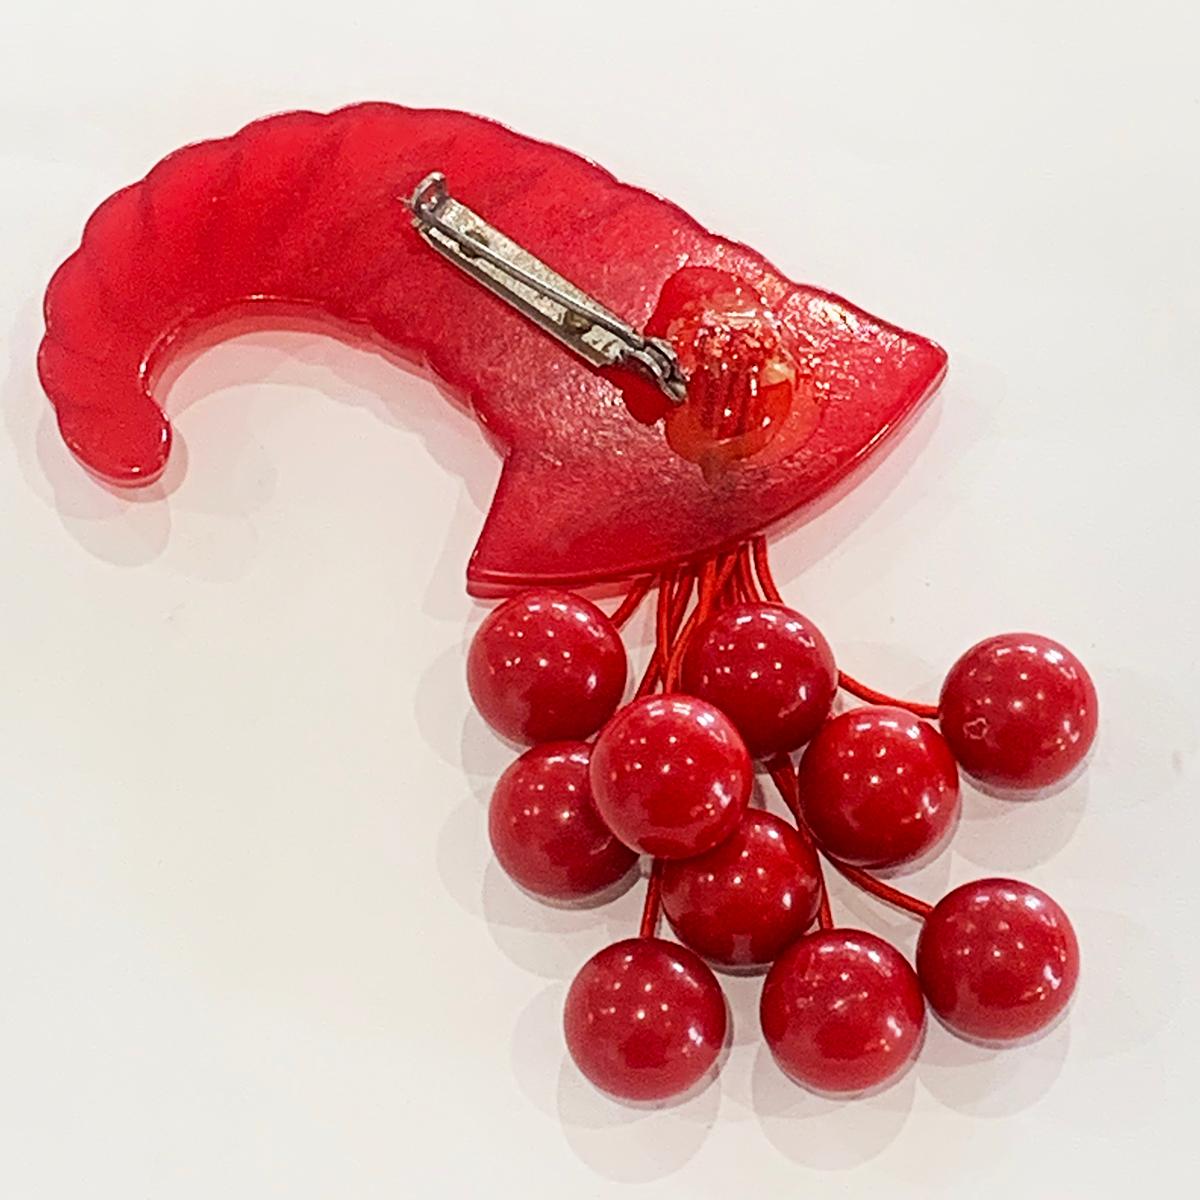 Art Deco Carved Red Bakelite Horn of Plenty brooch or pin with cherries. A truly wonderful creation in Red bakelite. The cherry stems and whole brooch (pin) is original with no repairs or losses; original “gum” holding the cherry stalks, and the pin